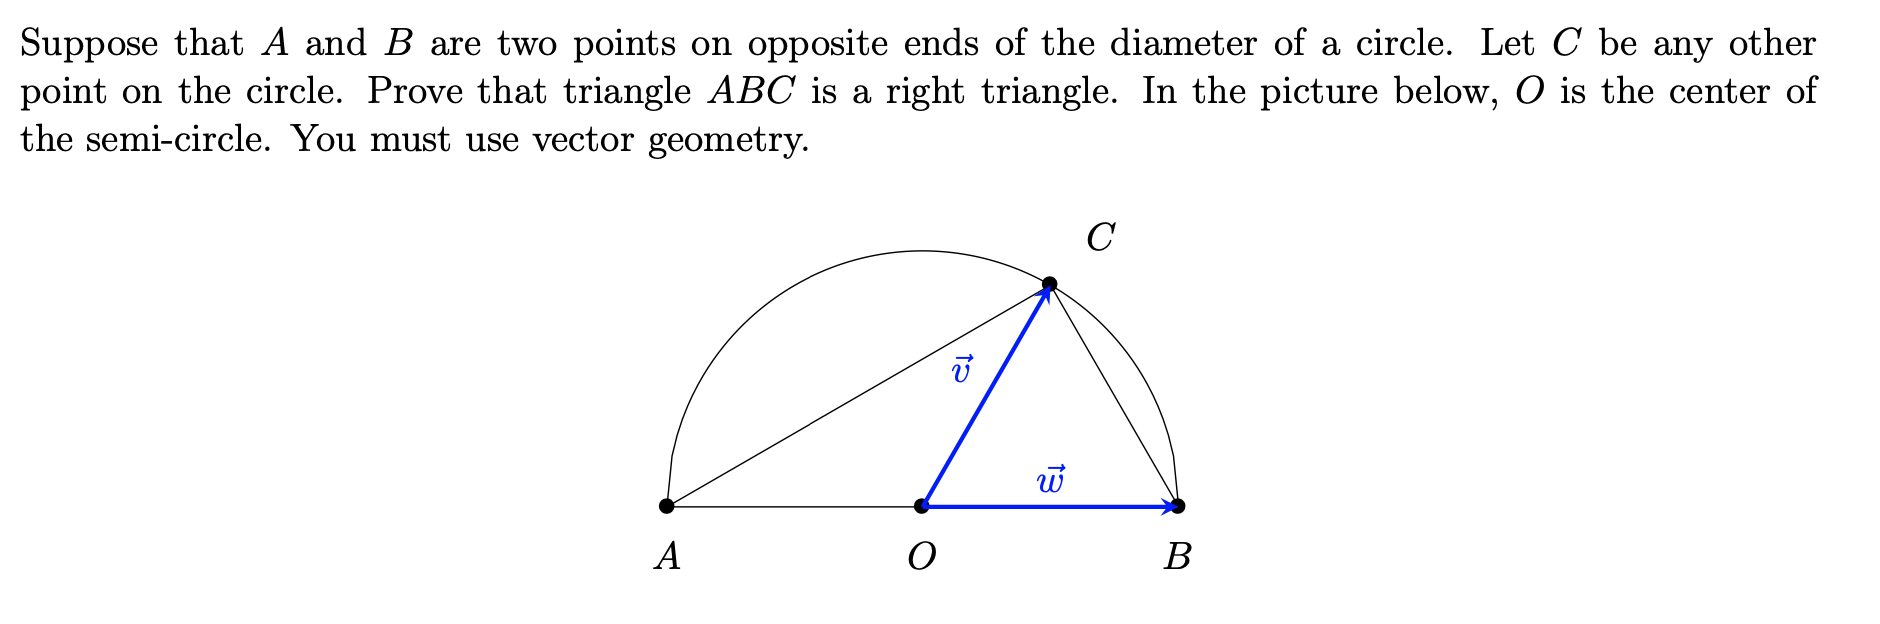 Suppose that A and B are two points on opposite ends of the diameter of a circle. Let C be any other
point on the circle. Prove that triangle ABC is a right triangle. In the picture below, O is the center of
the semi-circle. You must use vector geometry.
